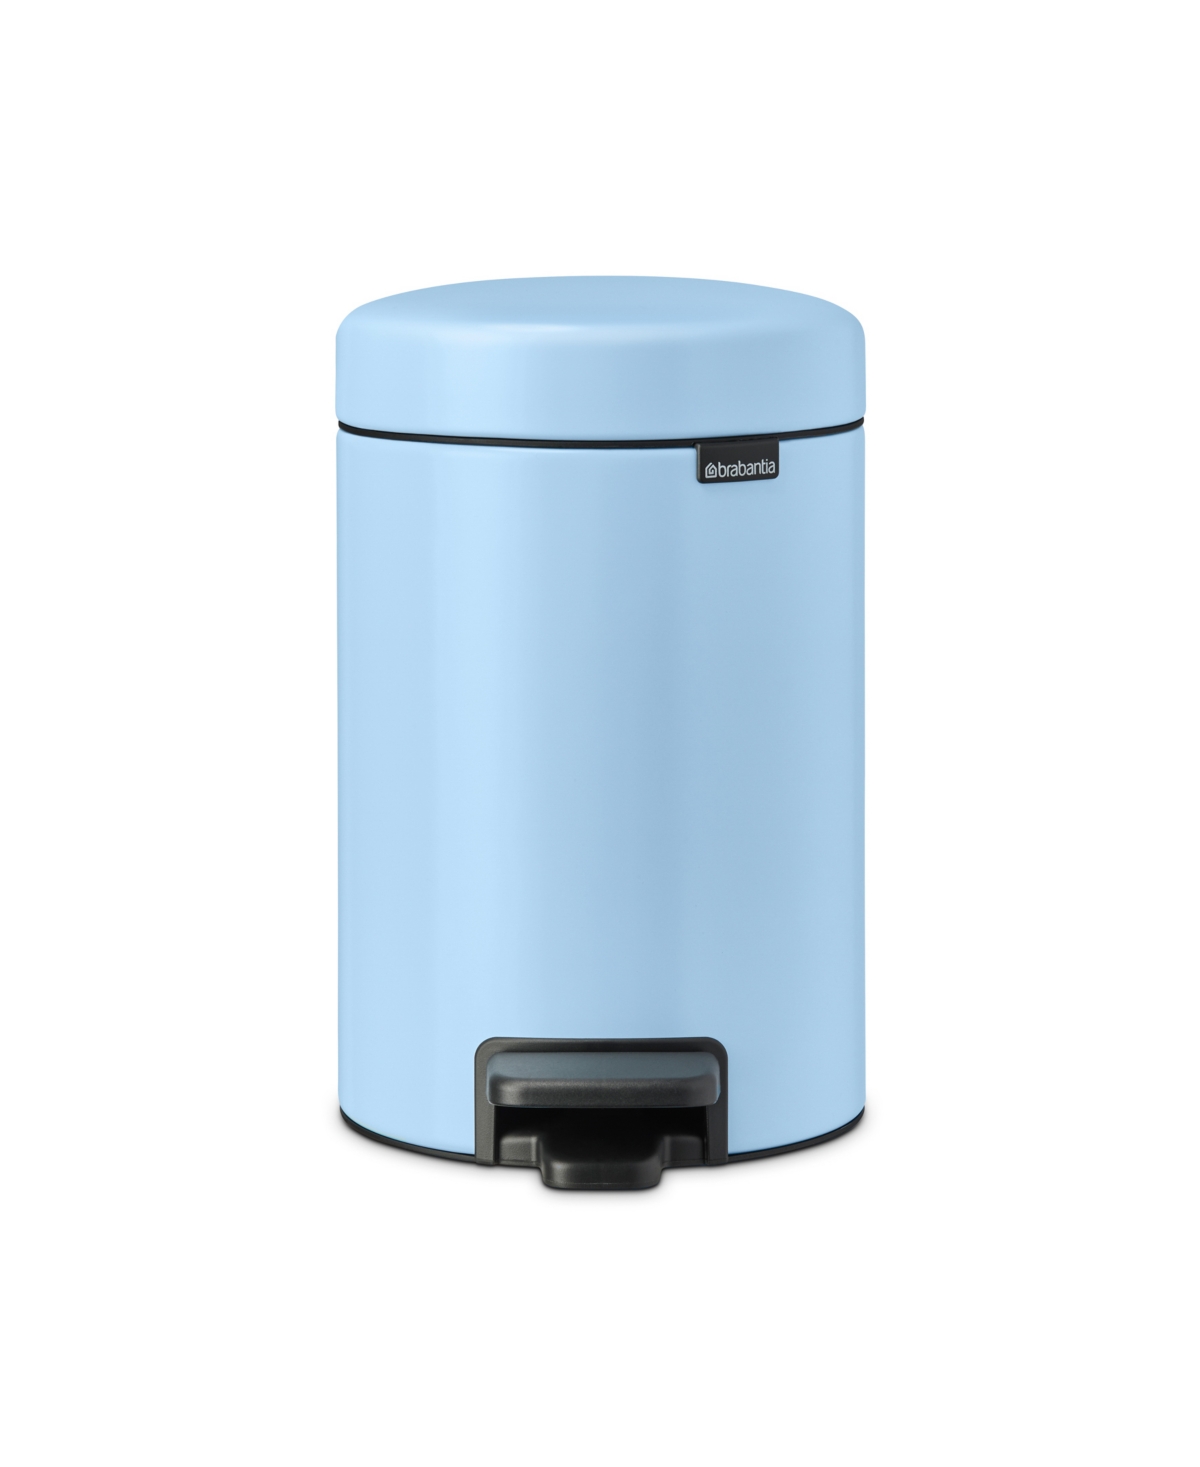 Brabantia New Icon Step On Trash Can, 0.8 Gallon, 3 Liter In Dreamy Blue